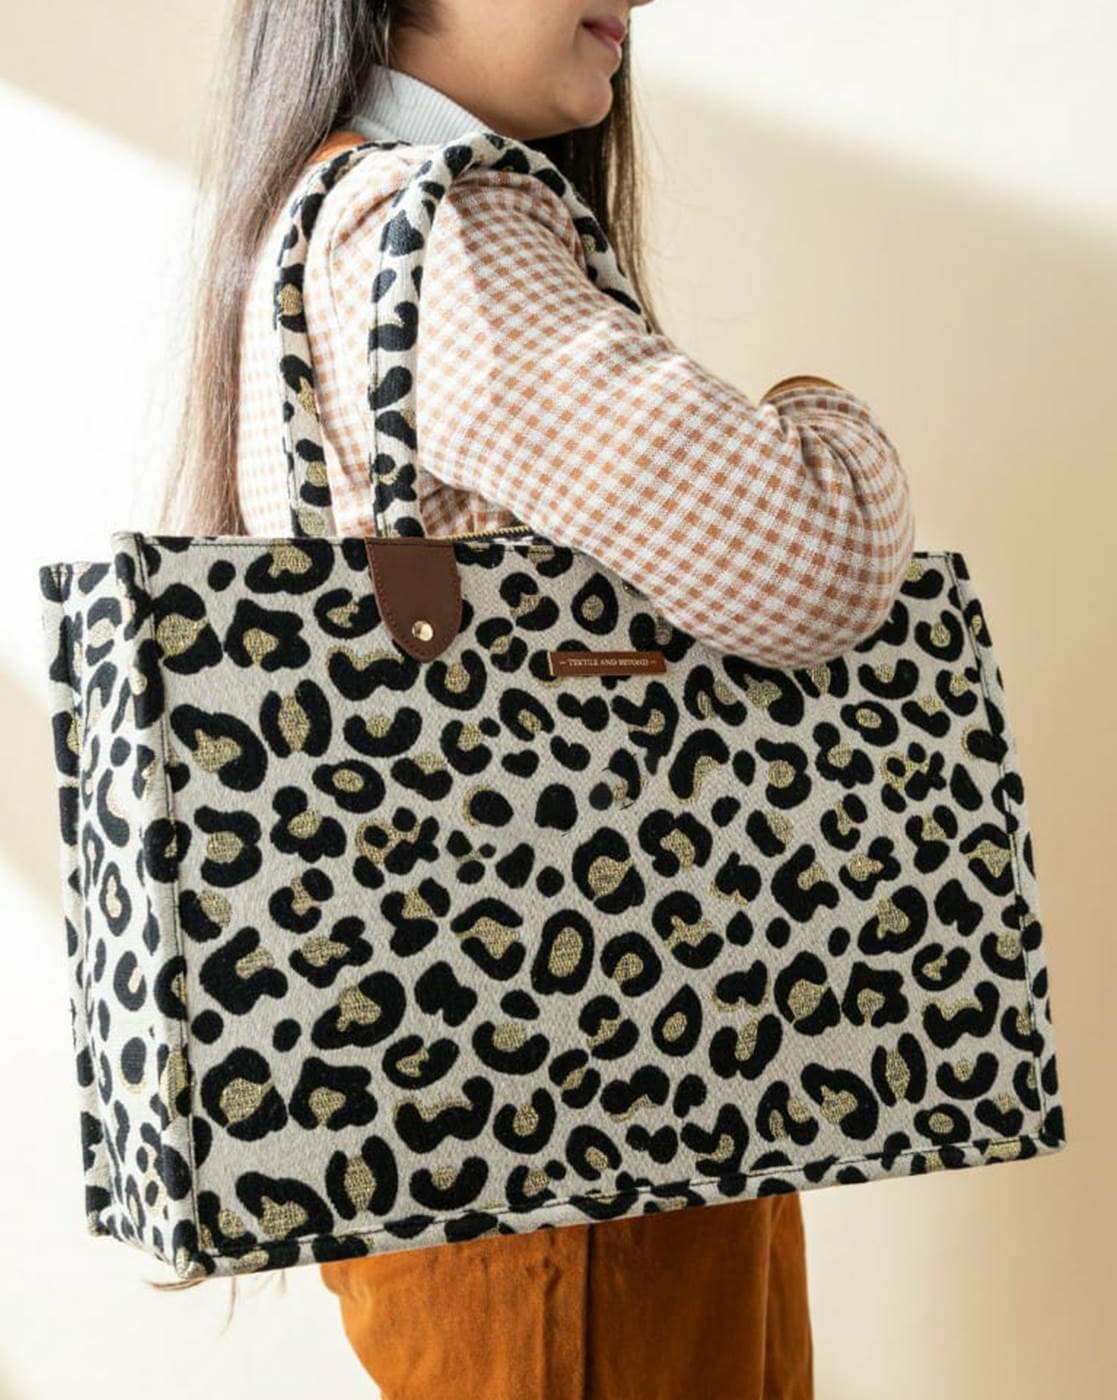 Textile And Beyond Leopard Print Tote Bag For Women (Multi, FS)